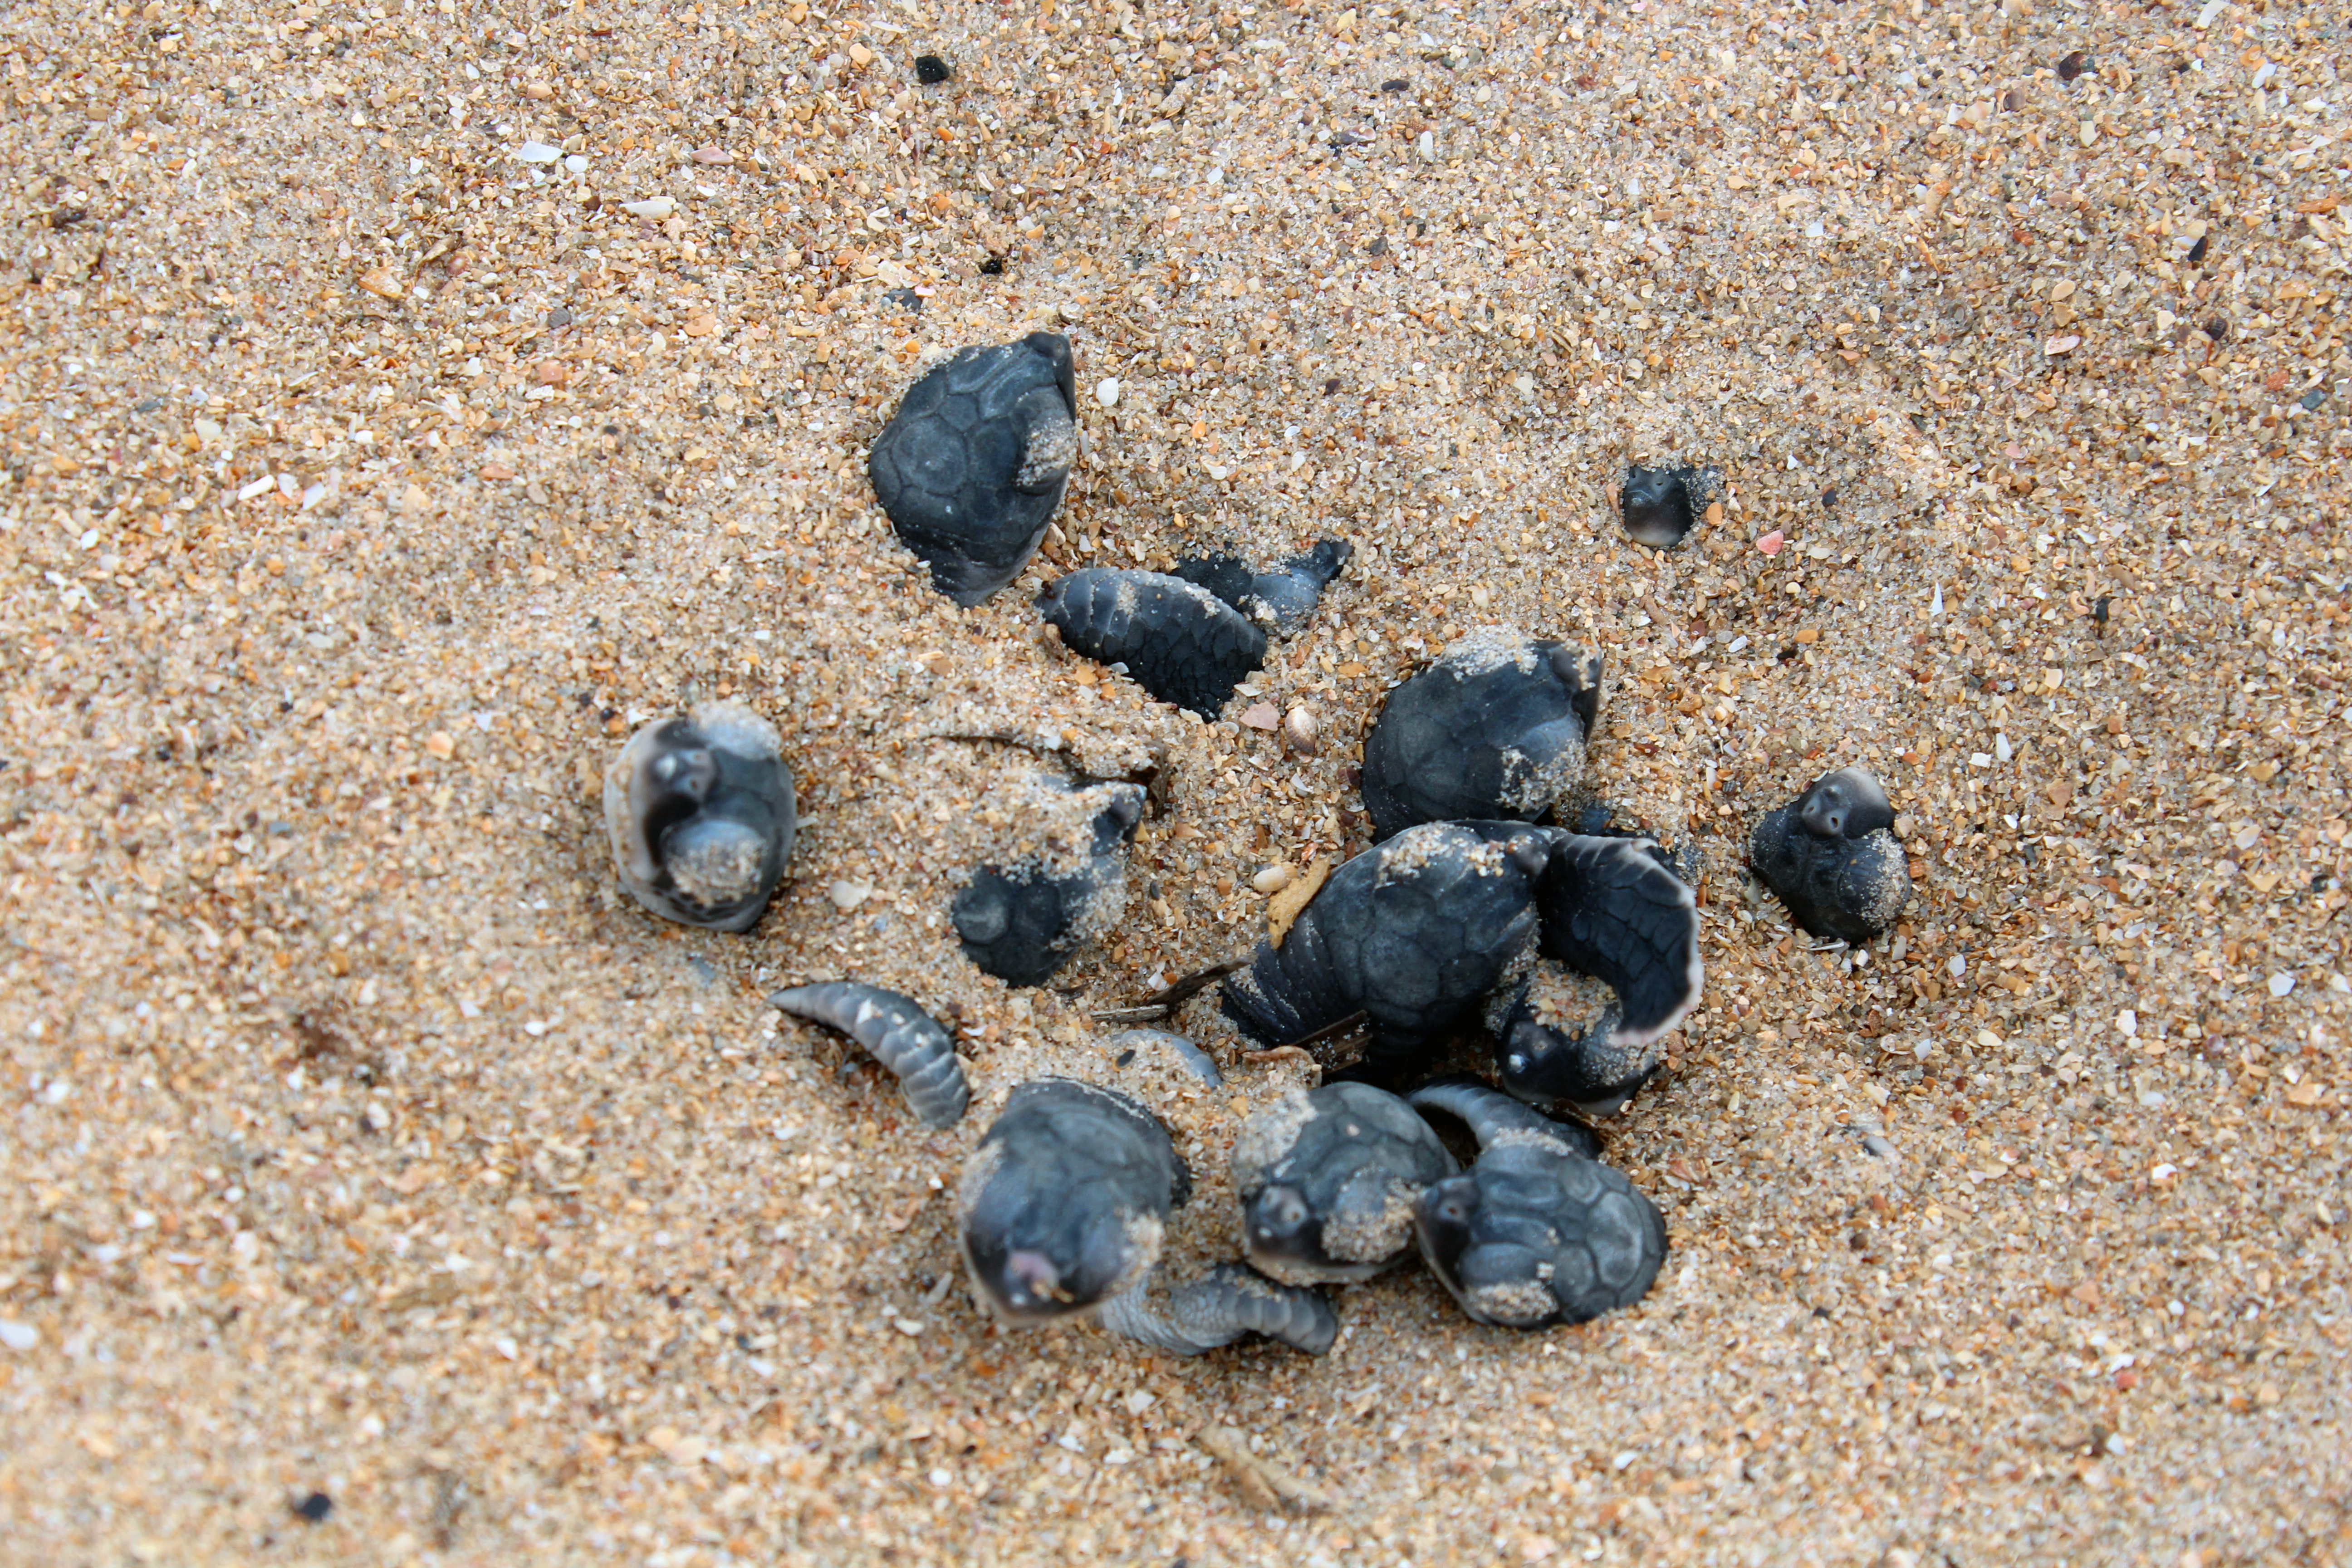 Hatchling green turtles emerging from nests